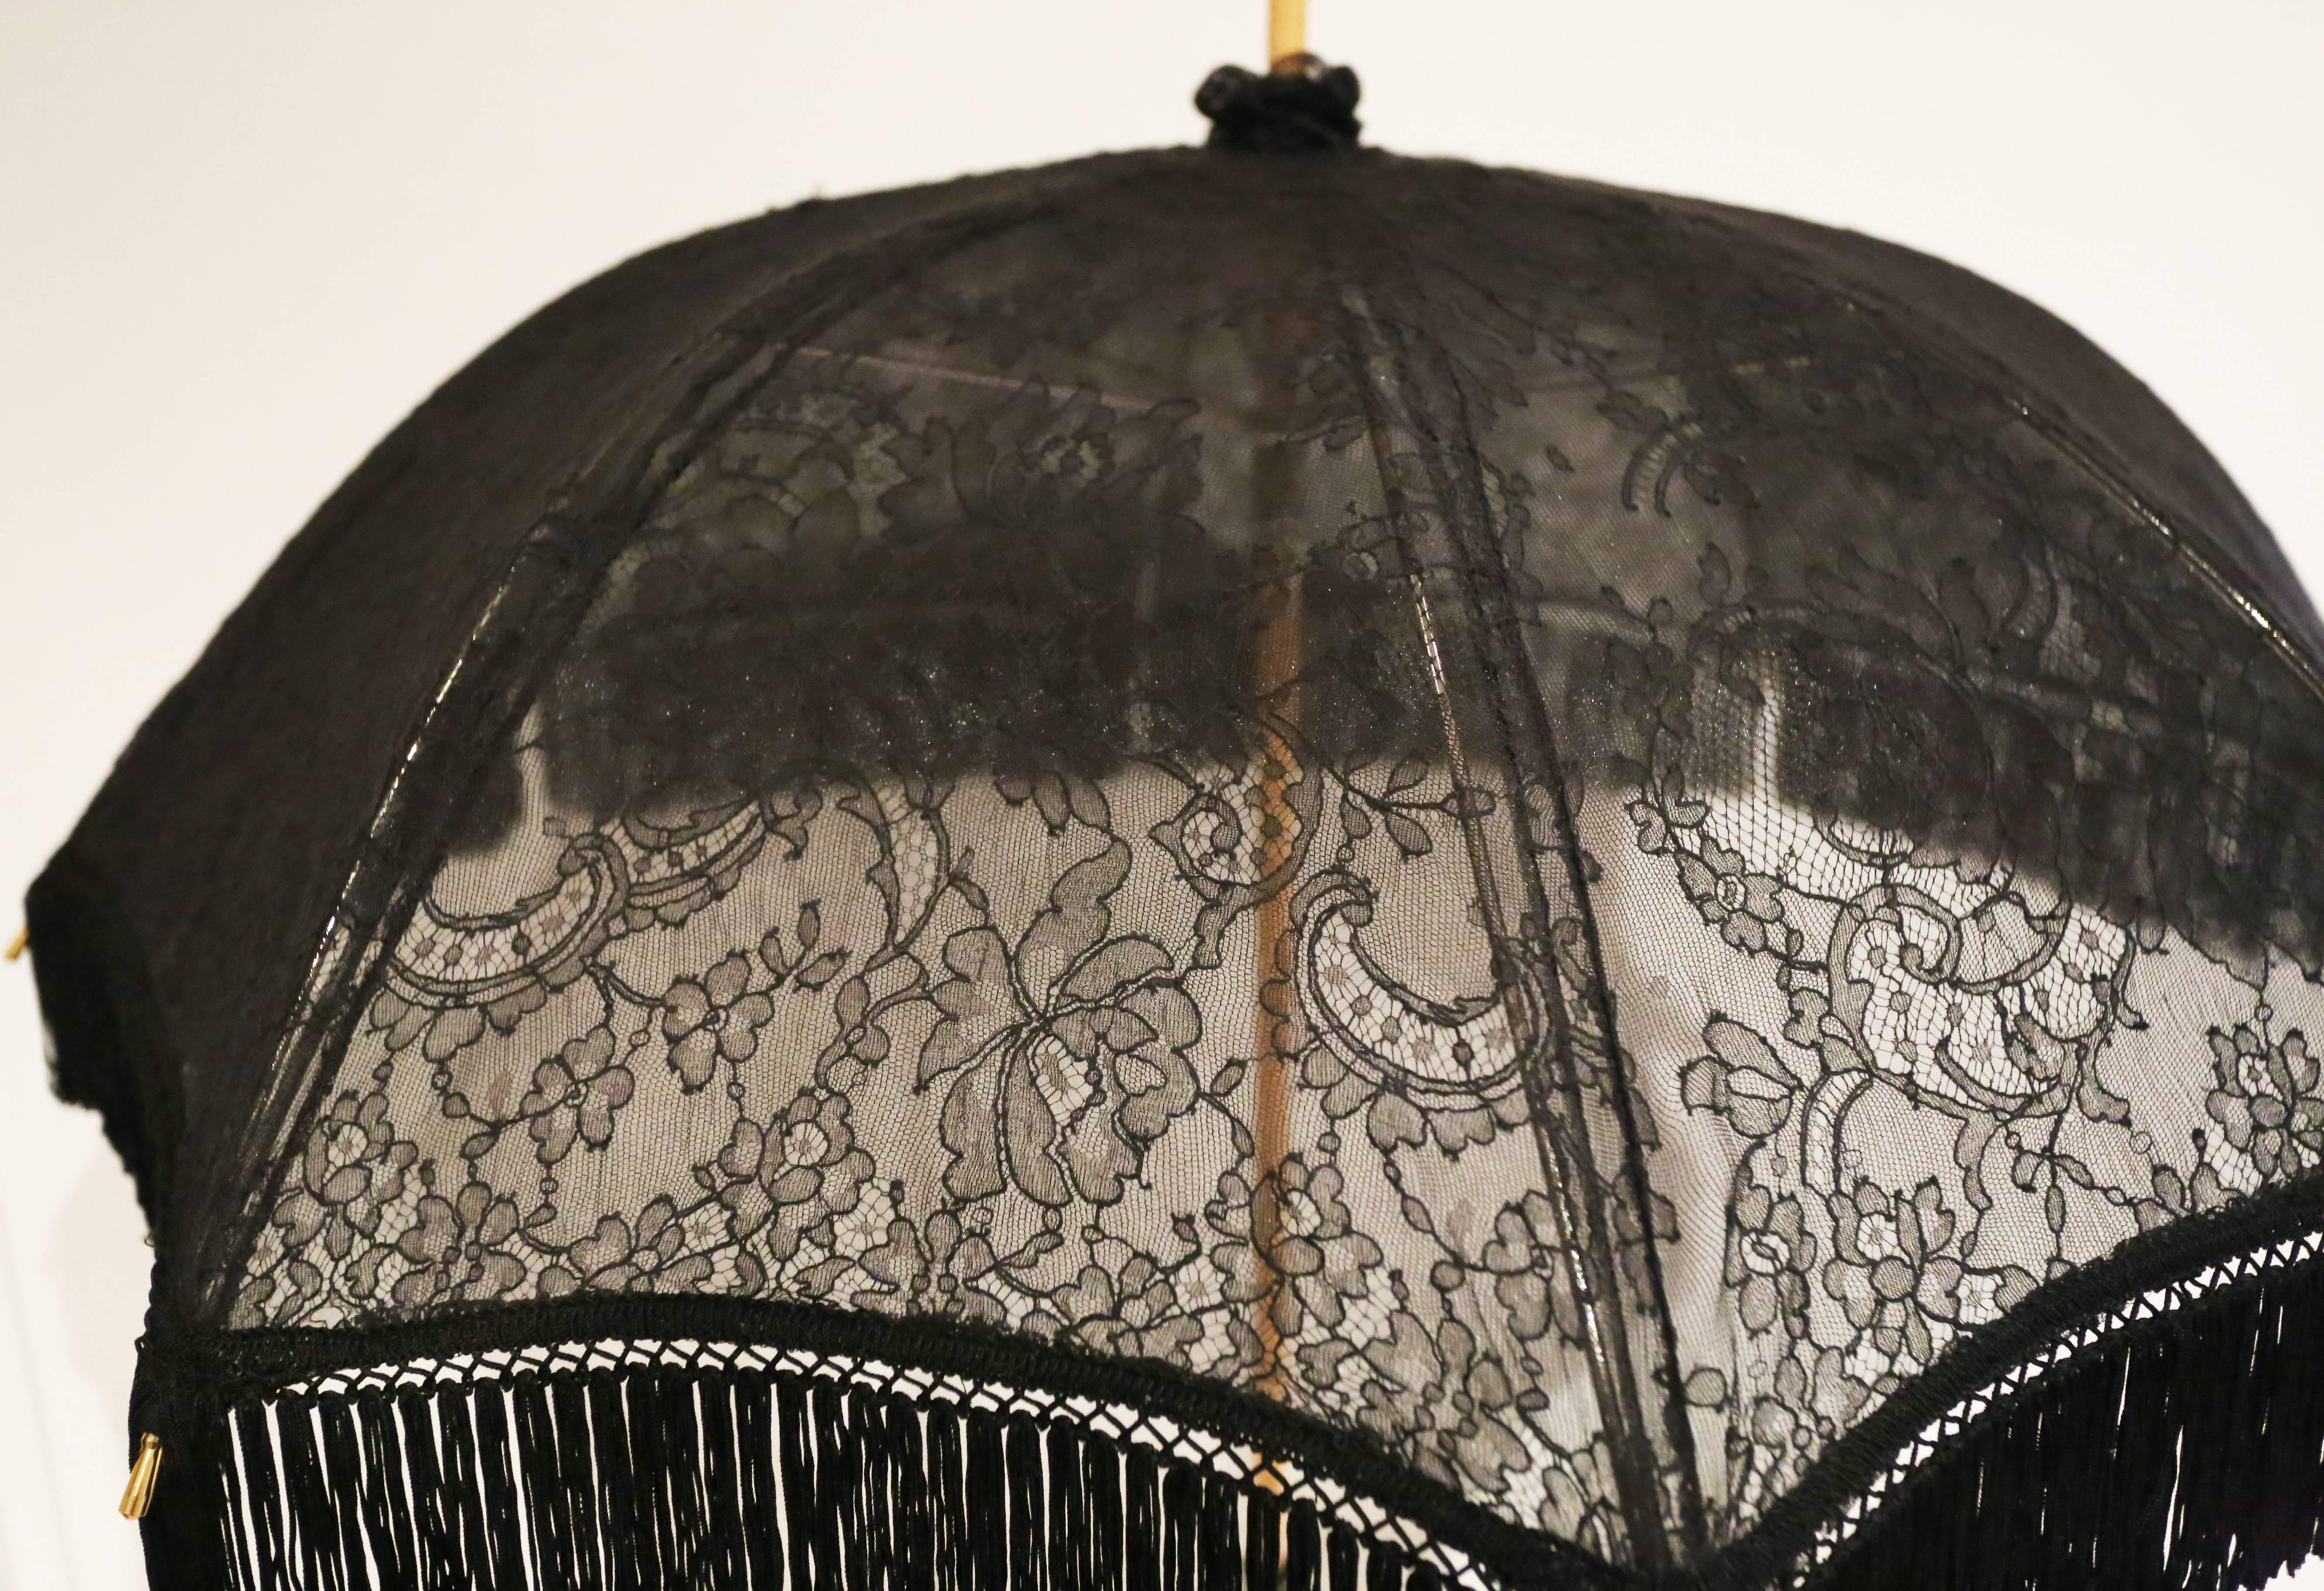 A one of a kind Vivienne Westwood black lace parasol, circa 1990s. The parasol has a fringed trim, wooden handle and tassel. 

